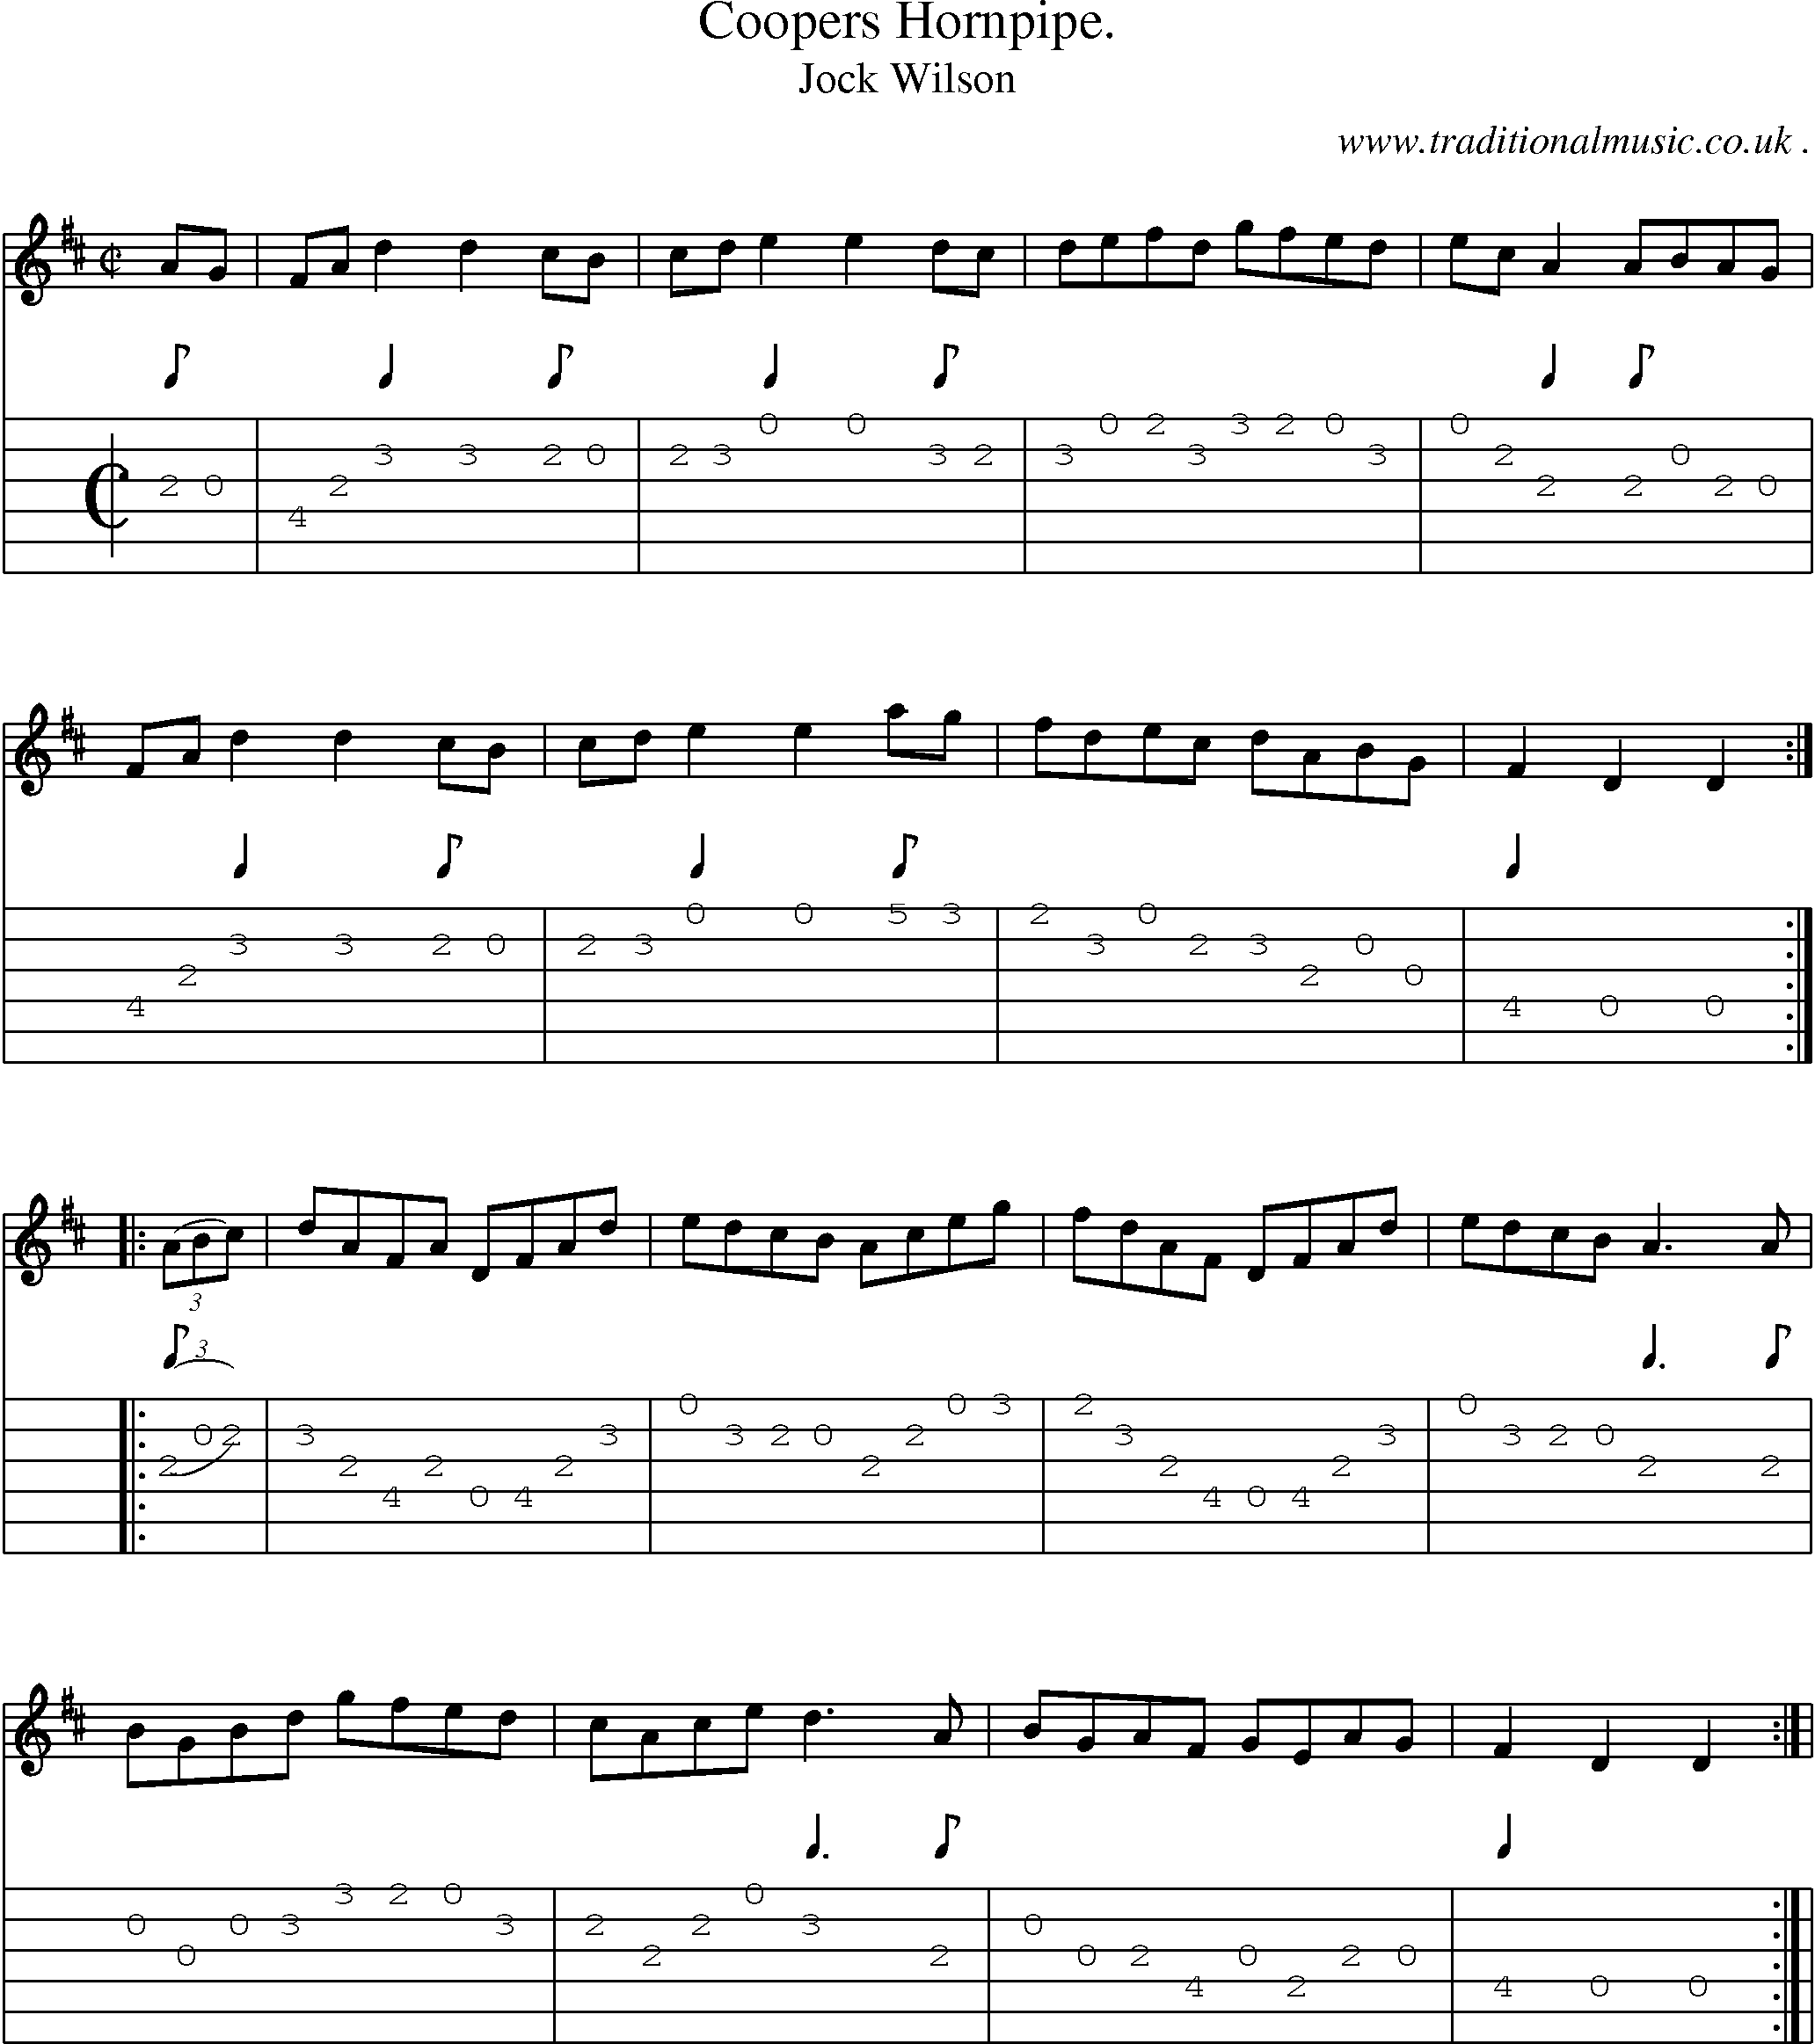 Sheet-Music and Guitar Tabs for Coopers Hornpipe